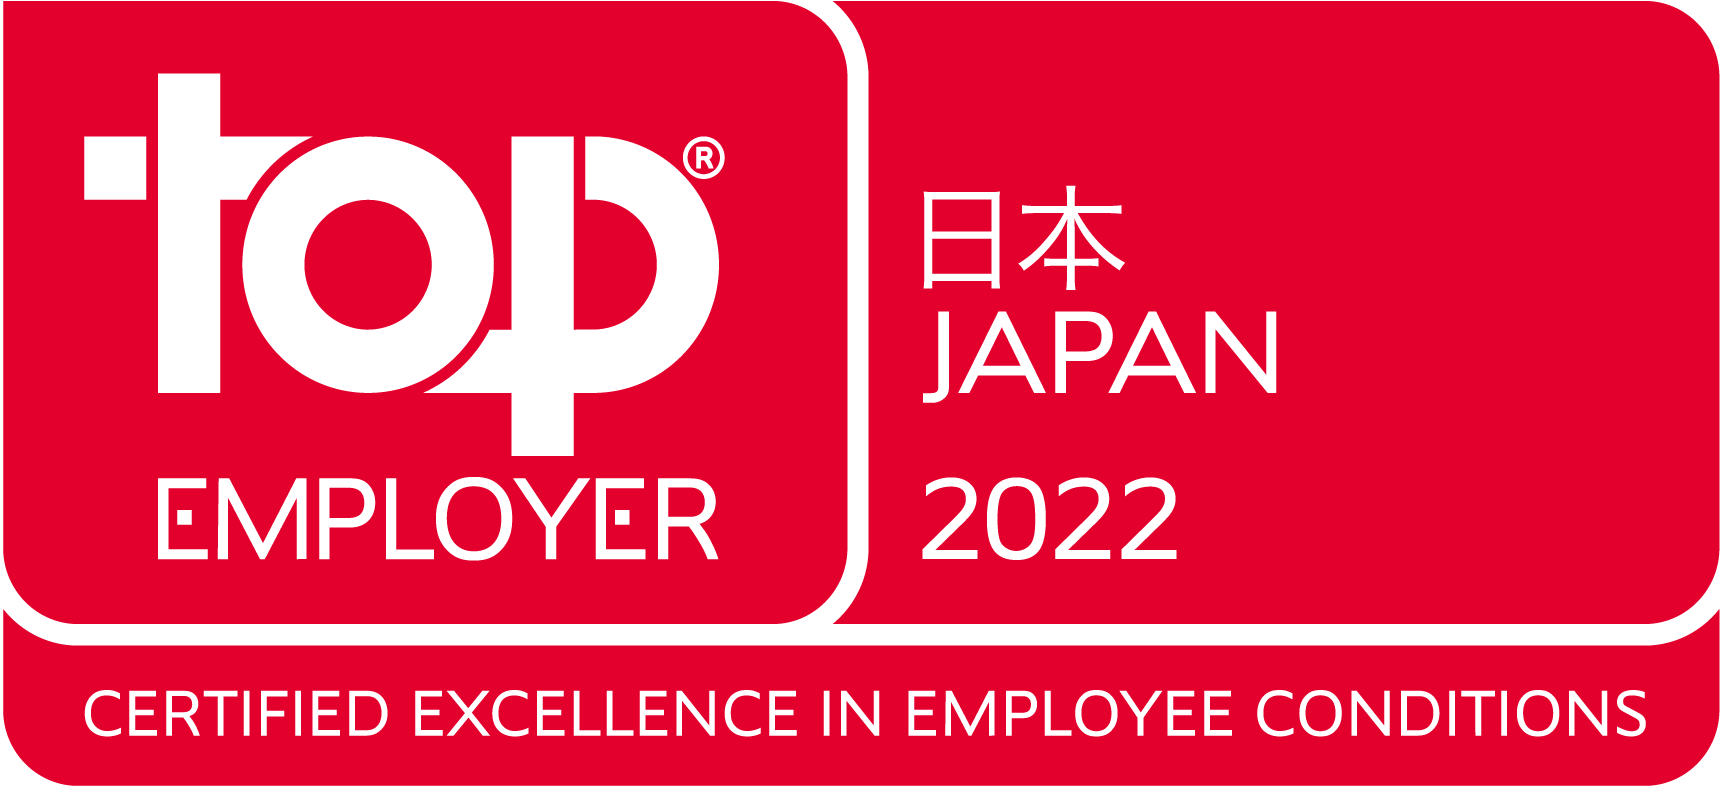 Top_Employer_Japan_2022.png